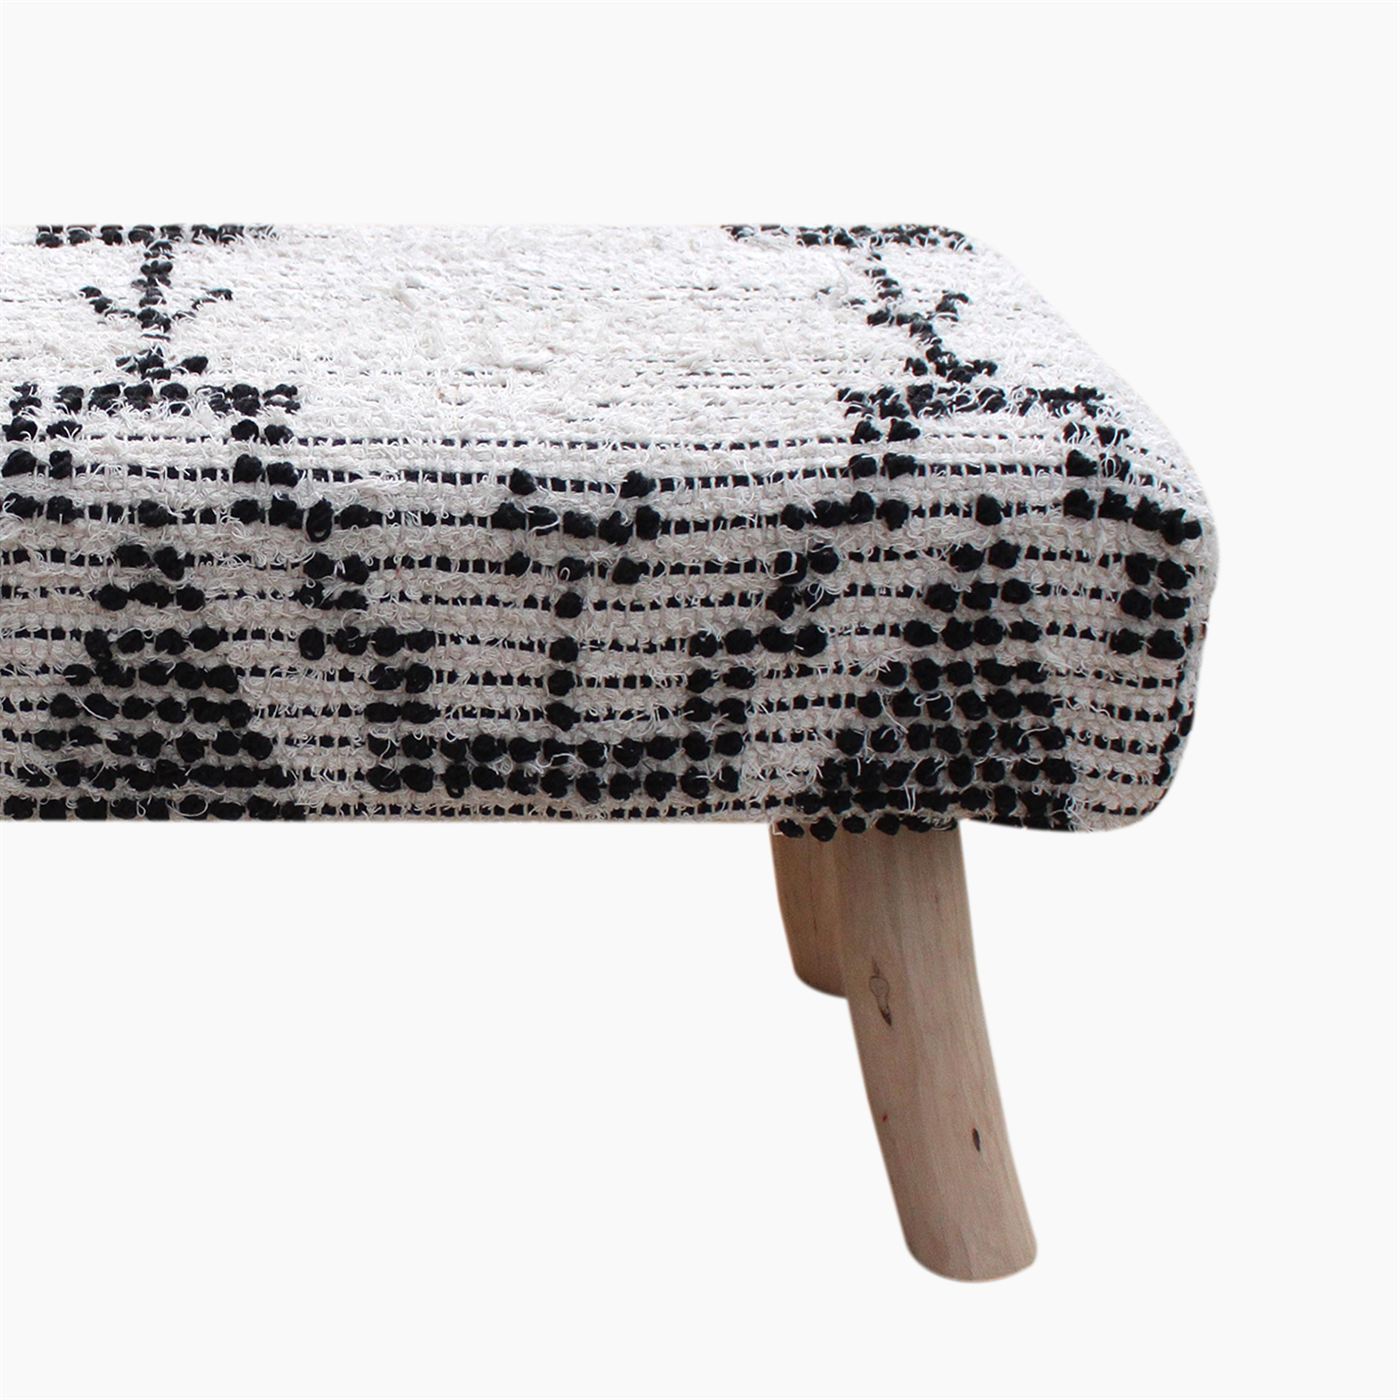 Rampart Bench, Cotton, Natural White, Charcoal, Pitloom, All Loop